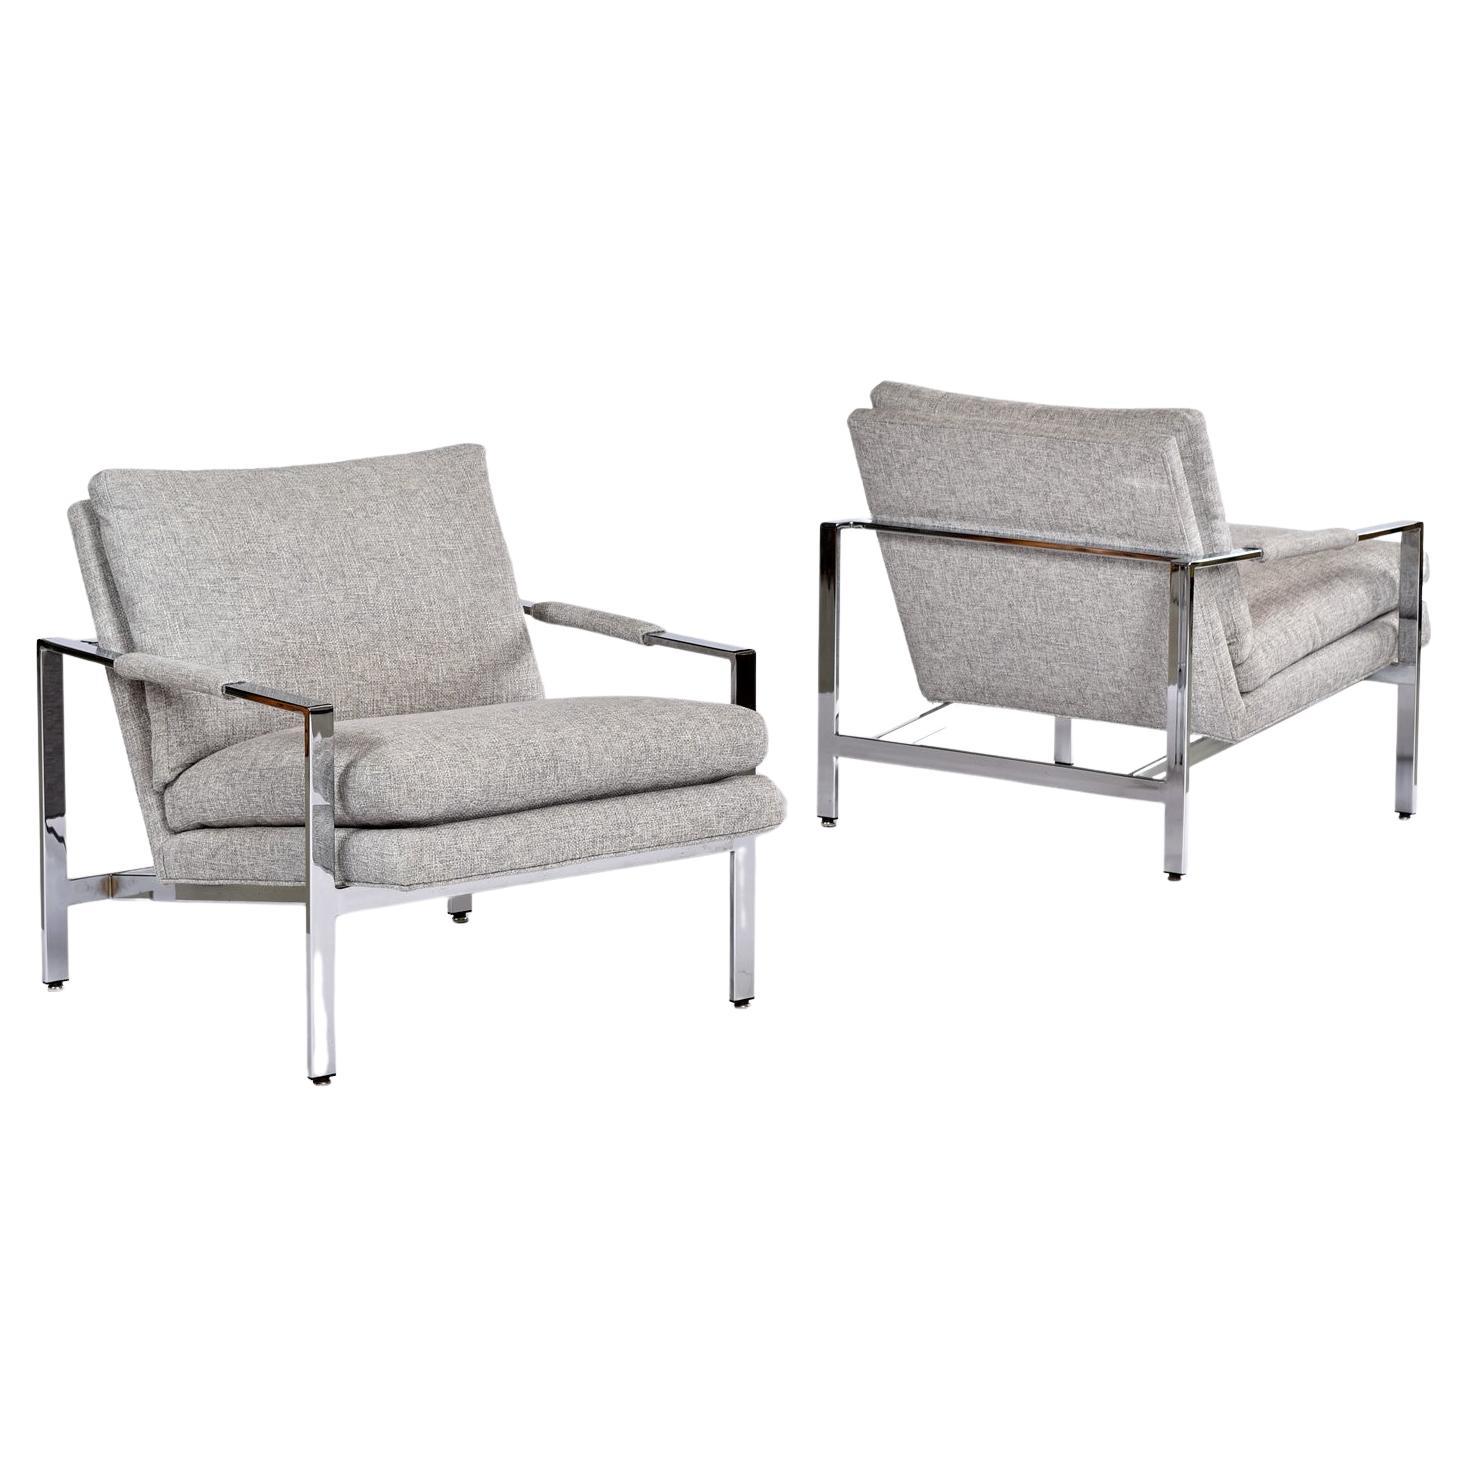 Mid-Century Modern Milo Baughman For Thayer Coggin 951 Flat Bar Chrome Lounge Chairs in Grey Tweed For Sale